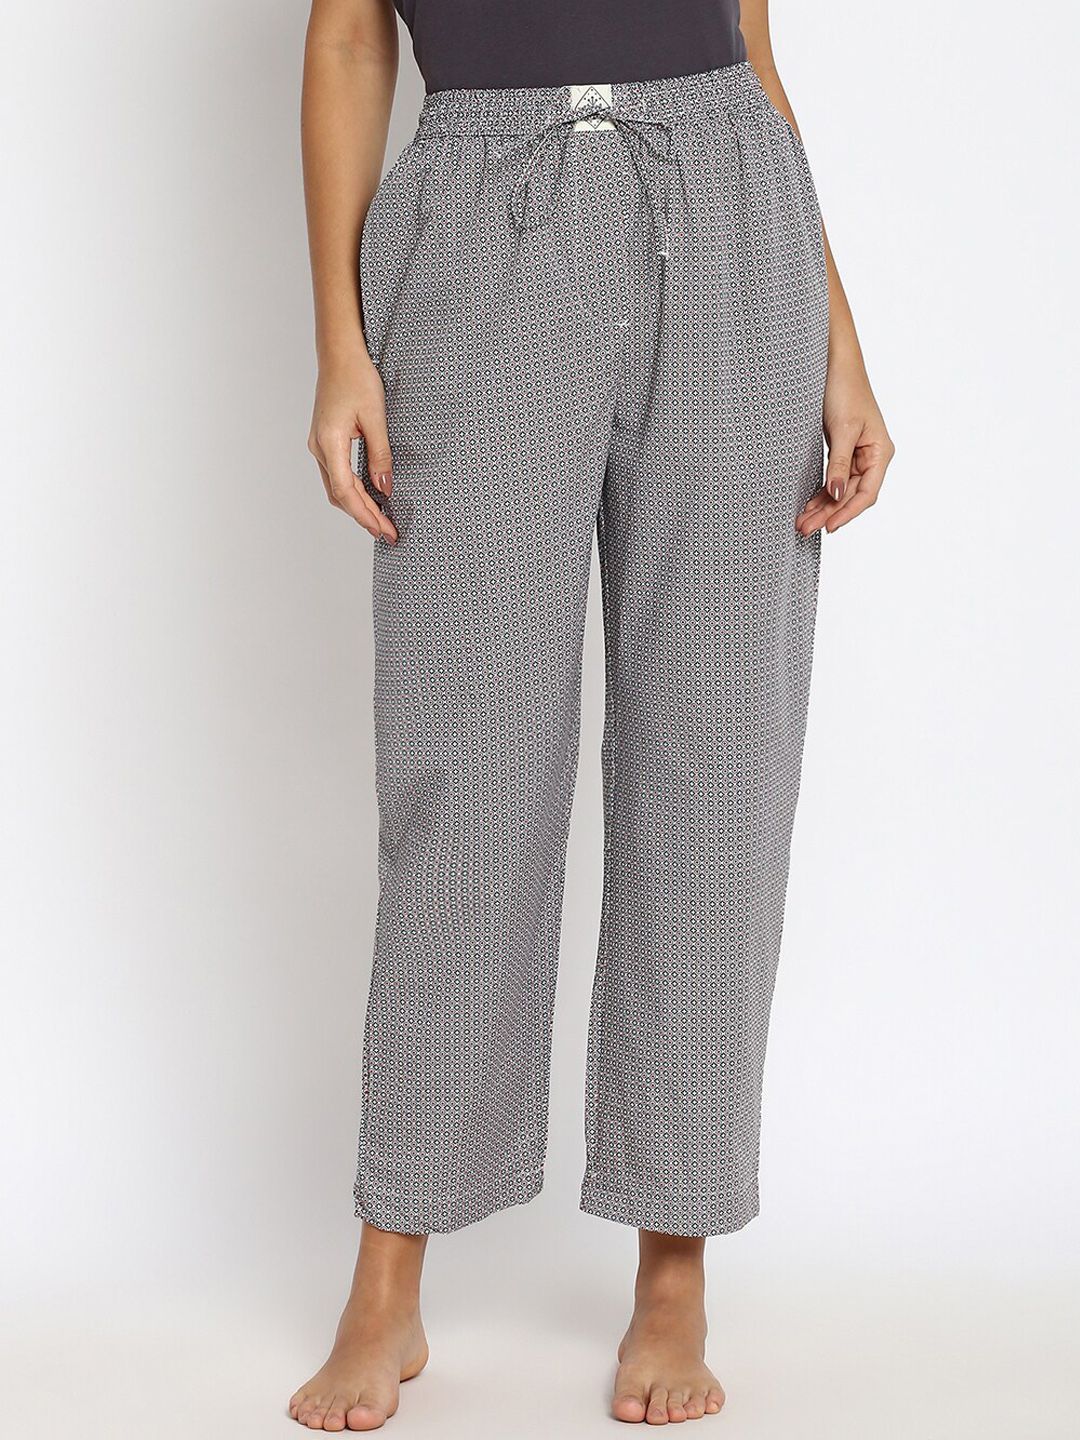 abof Women Grey Solid Cotton Lounge Pants Price in India